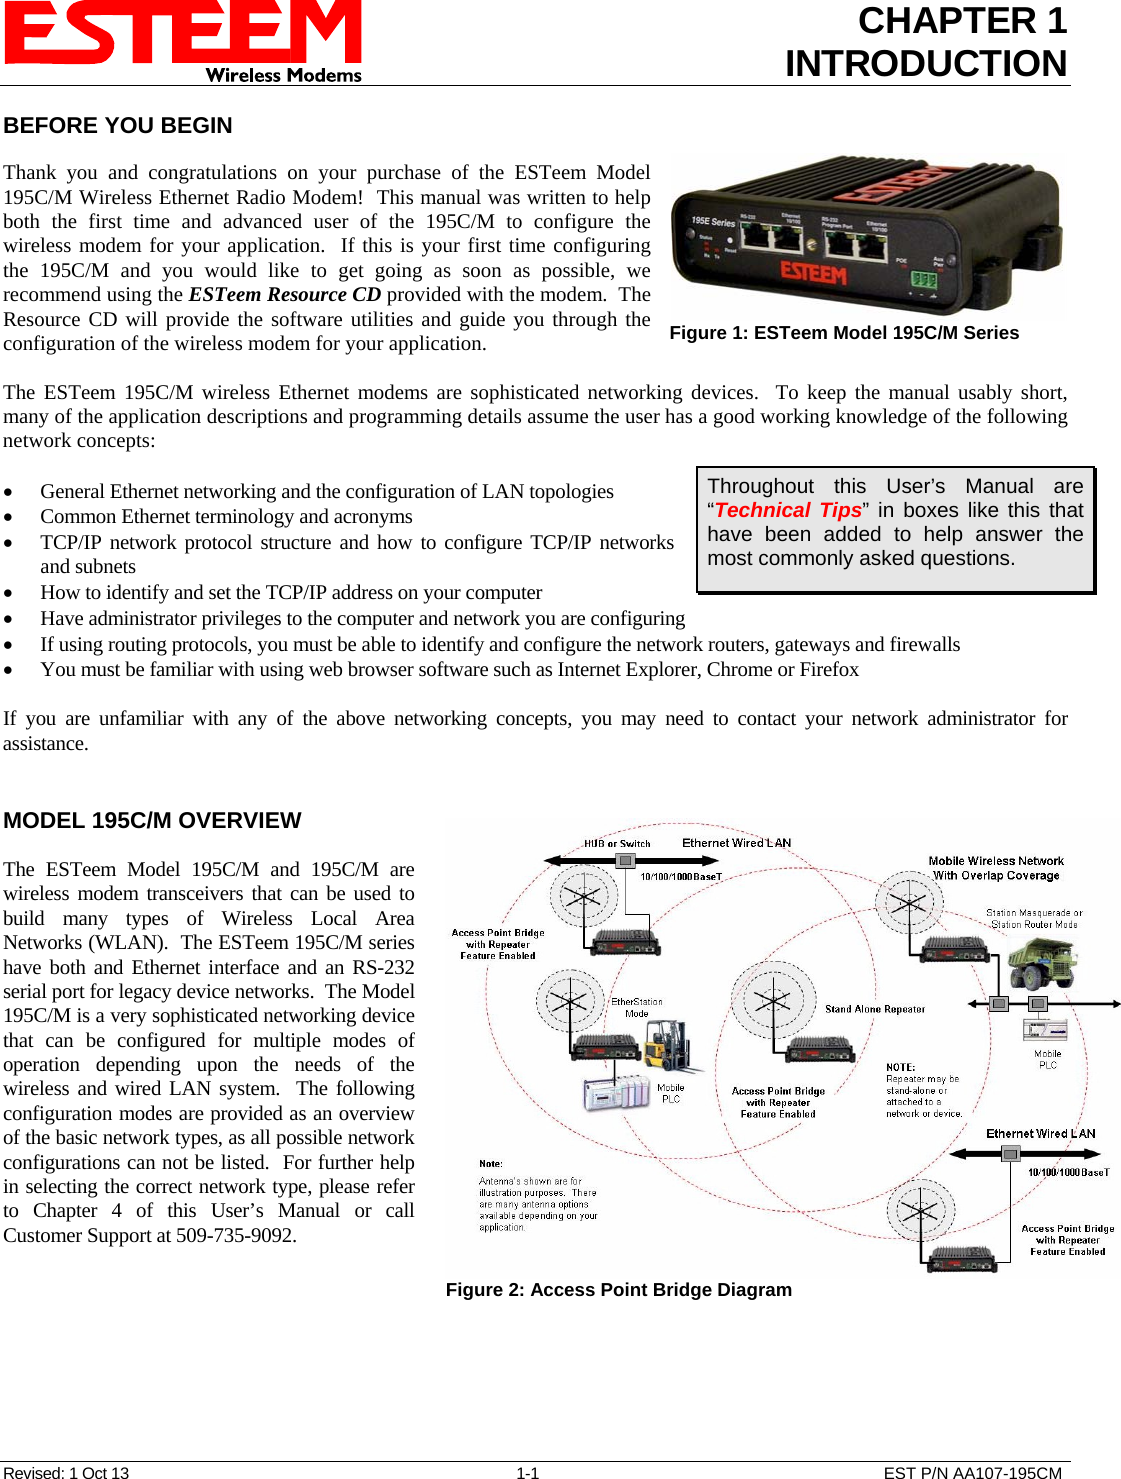 CHAPTER 1 INTRODUCTION  BEFORE YOU BEGIN   Thank you and congratulations on your purchase of the ESTeem Model 195C/M Wireless Ethernet Radio Modem!  This manual was written to help both the first time and advanced user of the 195C/M to configure the wireless modem for your application.  If this is your first time configuring the 195C/M and you would like to get going as soon as possible, we recommend using the ESTeem Resource CD provided with the modem.  The Resource CD will provide the software utilities and guide you through the configuration of the wireless modem for your application.  Figure 1: ESTeem Model 195C/M Series   The ESTeem 195C/M wireless Ethernet modems are sophisticated networking devices.  To keep the manual usably short, many of the application descriptions and programming details assume the user has a good working knowledge of the following network concepts:  Throughout this User’s Manual are “Technical Tips” in boxes like this that have been added to help answer the most commonly asked questions. • General Ethernet networking and the configuration of LAN topologies  • Common Ethernet terminology and acronyms • TCP/IP network protocol structure and how to configure TCP/IP networks and subnets • How to identify and set the TCP/IP address on your computer • Have administrator privileges to the computer and network you are configuring • If using routing protocols, you must be able to identify and configure the network routers, gateways and firewalls • You must be familiar with using web browser software such as Internet Explorer, Chrome or Firefox  If you are unfamiliar with any of the above networking concepts, you may need to contact your network administrator for assistance.   MODEL 195C/M OVERVIEW  Figure 2: Access Point Bridge Diagram   The ESTeem Model 195C/M and 195C/M are wireless modem transceivers that can be used to build many types of Wireless Local Area Networks (WLAN).  The ESTeem 195C/M series have both and Ethernet interface and an RS-232 serial port for legacy device networks.  The Model 195C/M is a very sophisticated networking device that can be configured for multiple modes of operation depending upon the needs of the wireless and wired LAN system.  The following configuration modes are provided as an overview of the basic network types, as all possible network configurations can not be listed.  For further help in selecting the correct network type, please refer to Chapter 4 of this User’s Manual or call Customer Support at 509-735-9092.  Revised: 1 Oct 13  1-1  EST P/N AA107-195CM 